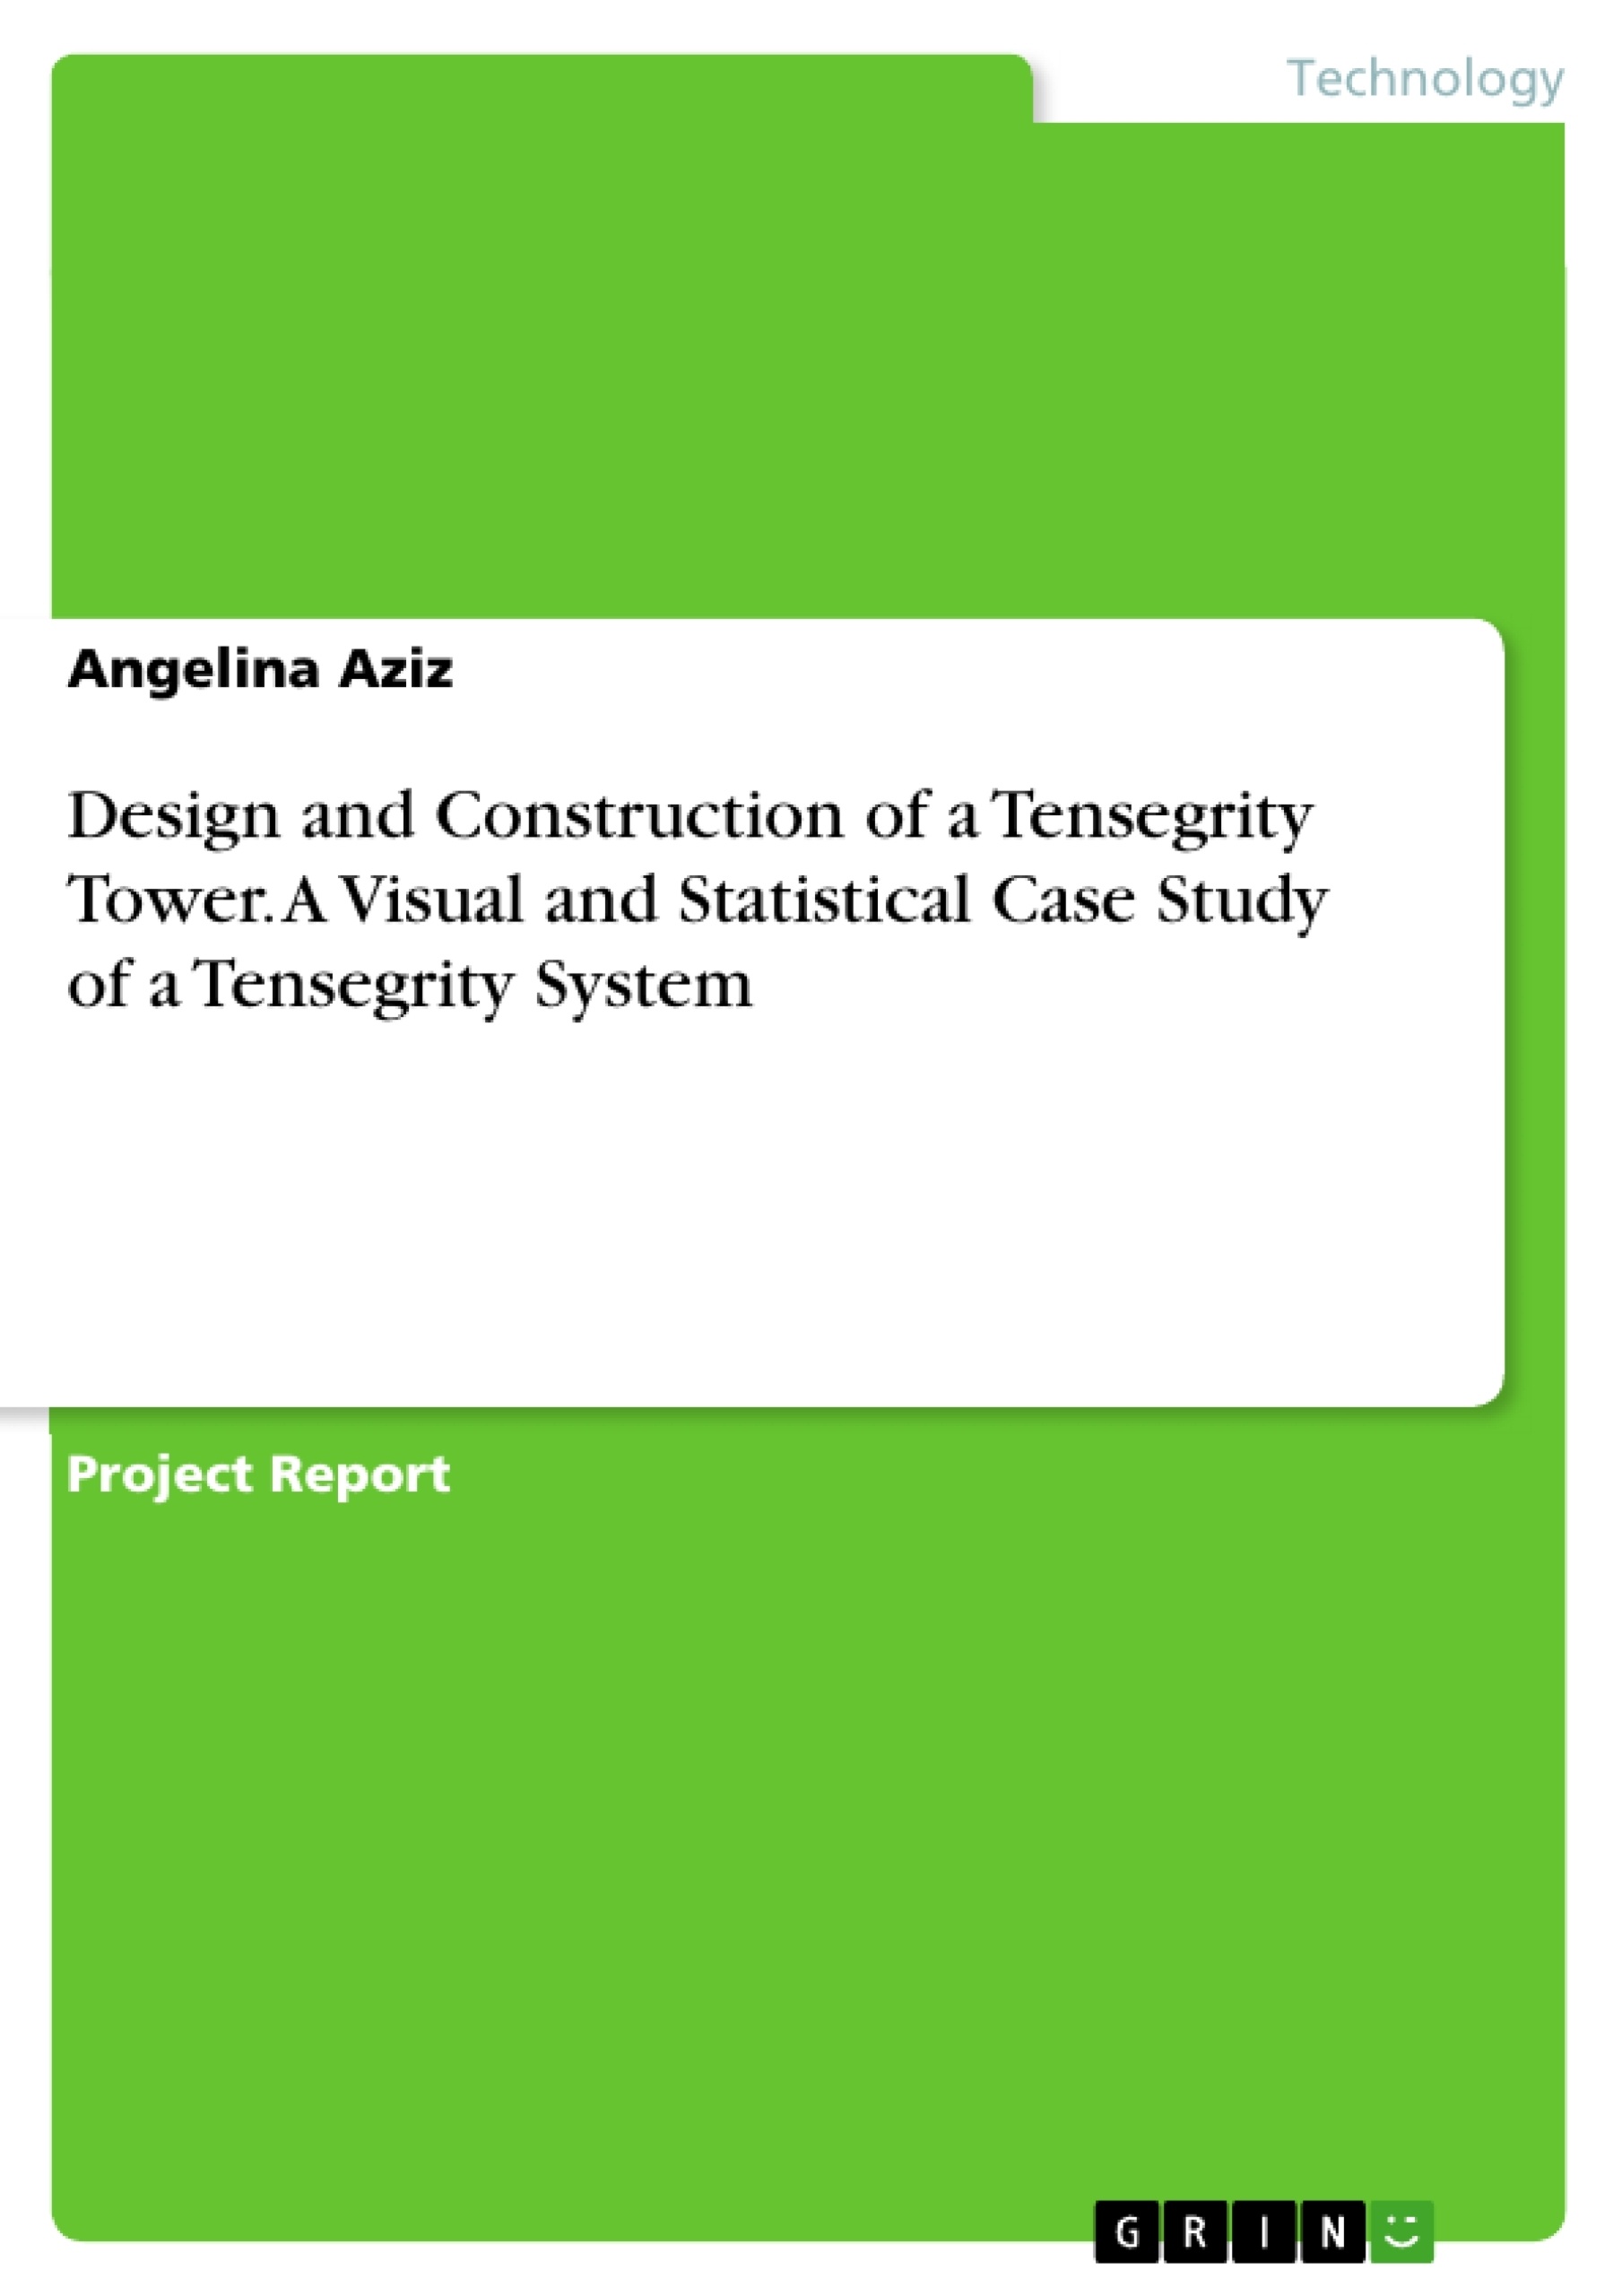 Title: Design and Construction of a Tensegrity Tower. A Visual and Statistical Case Study of a Tensegrity System